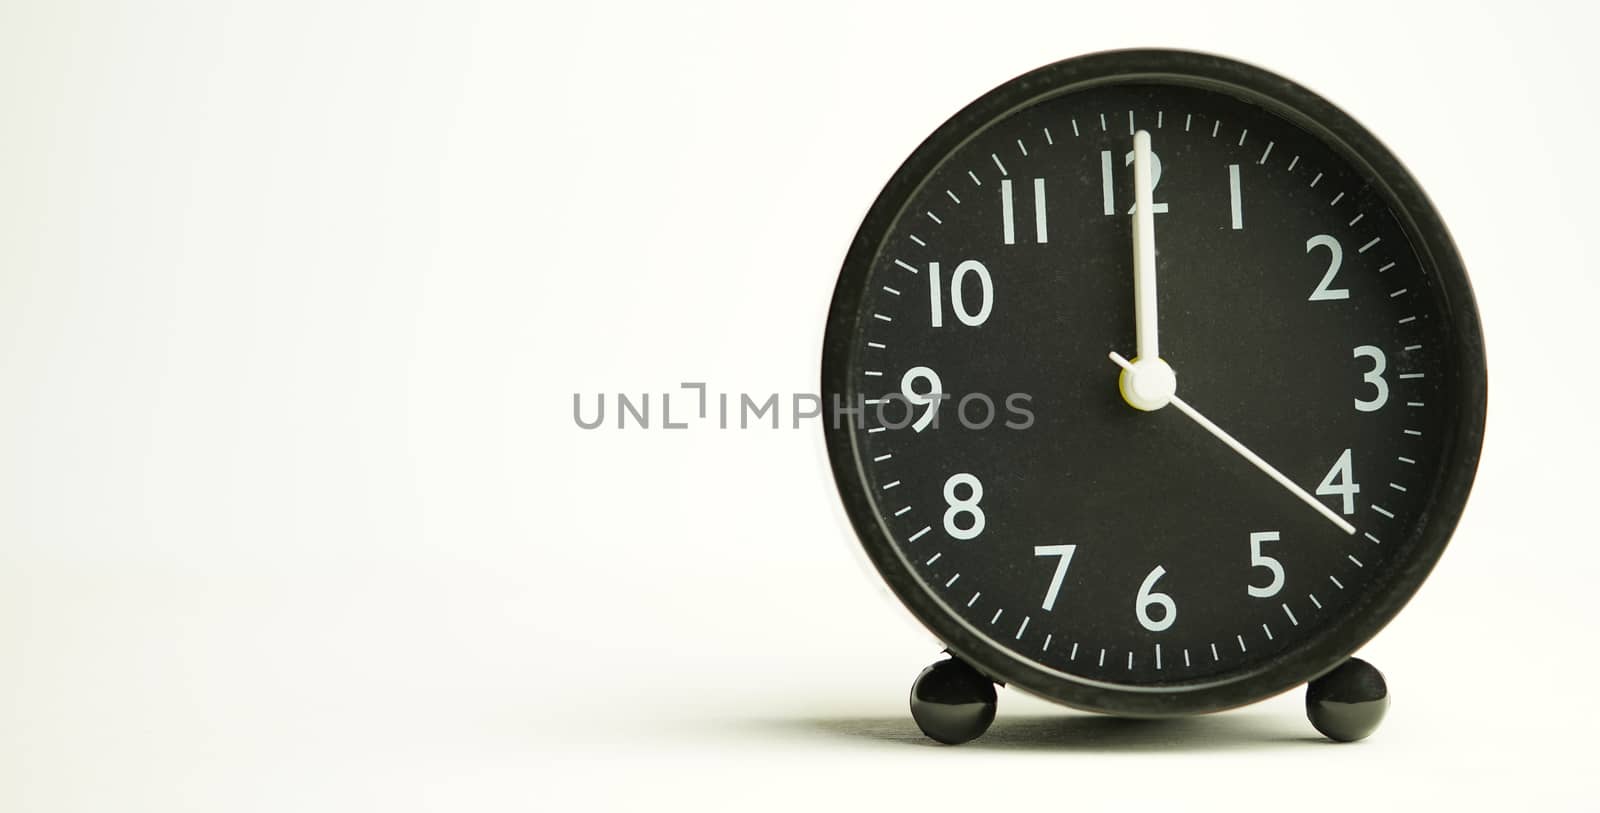 Decorative black alarm clock for noon separating white backgroun by noppha80